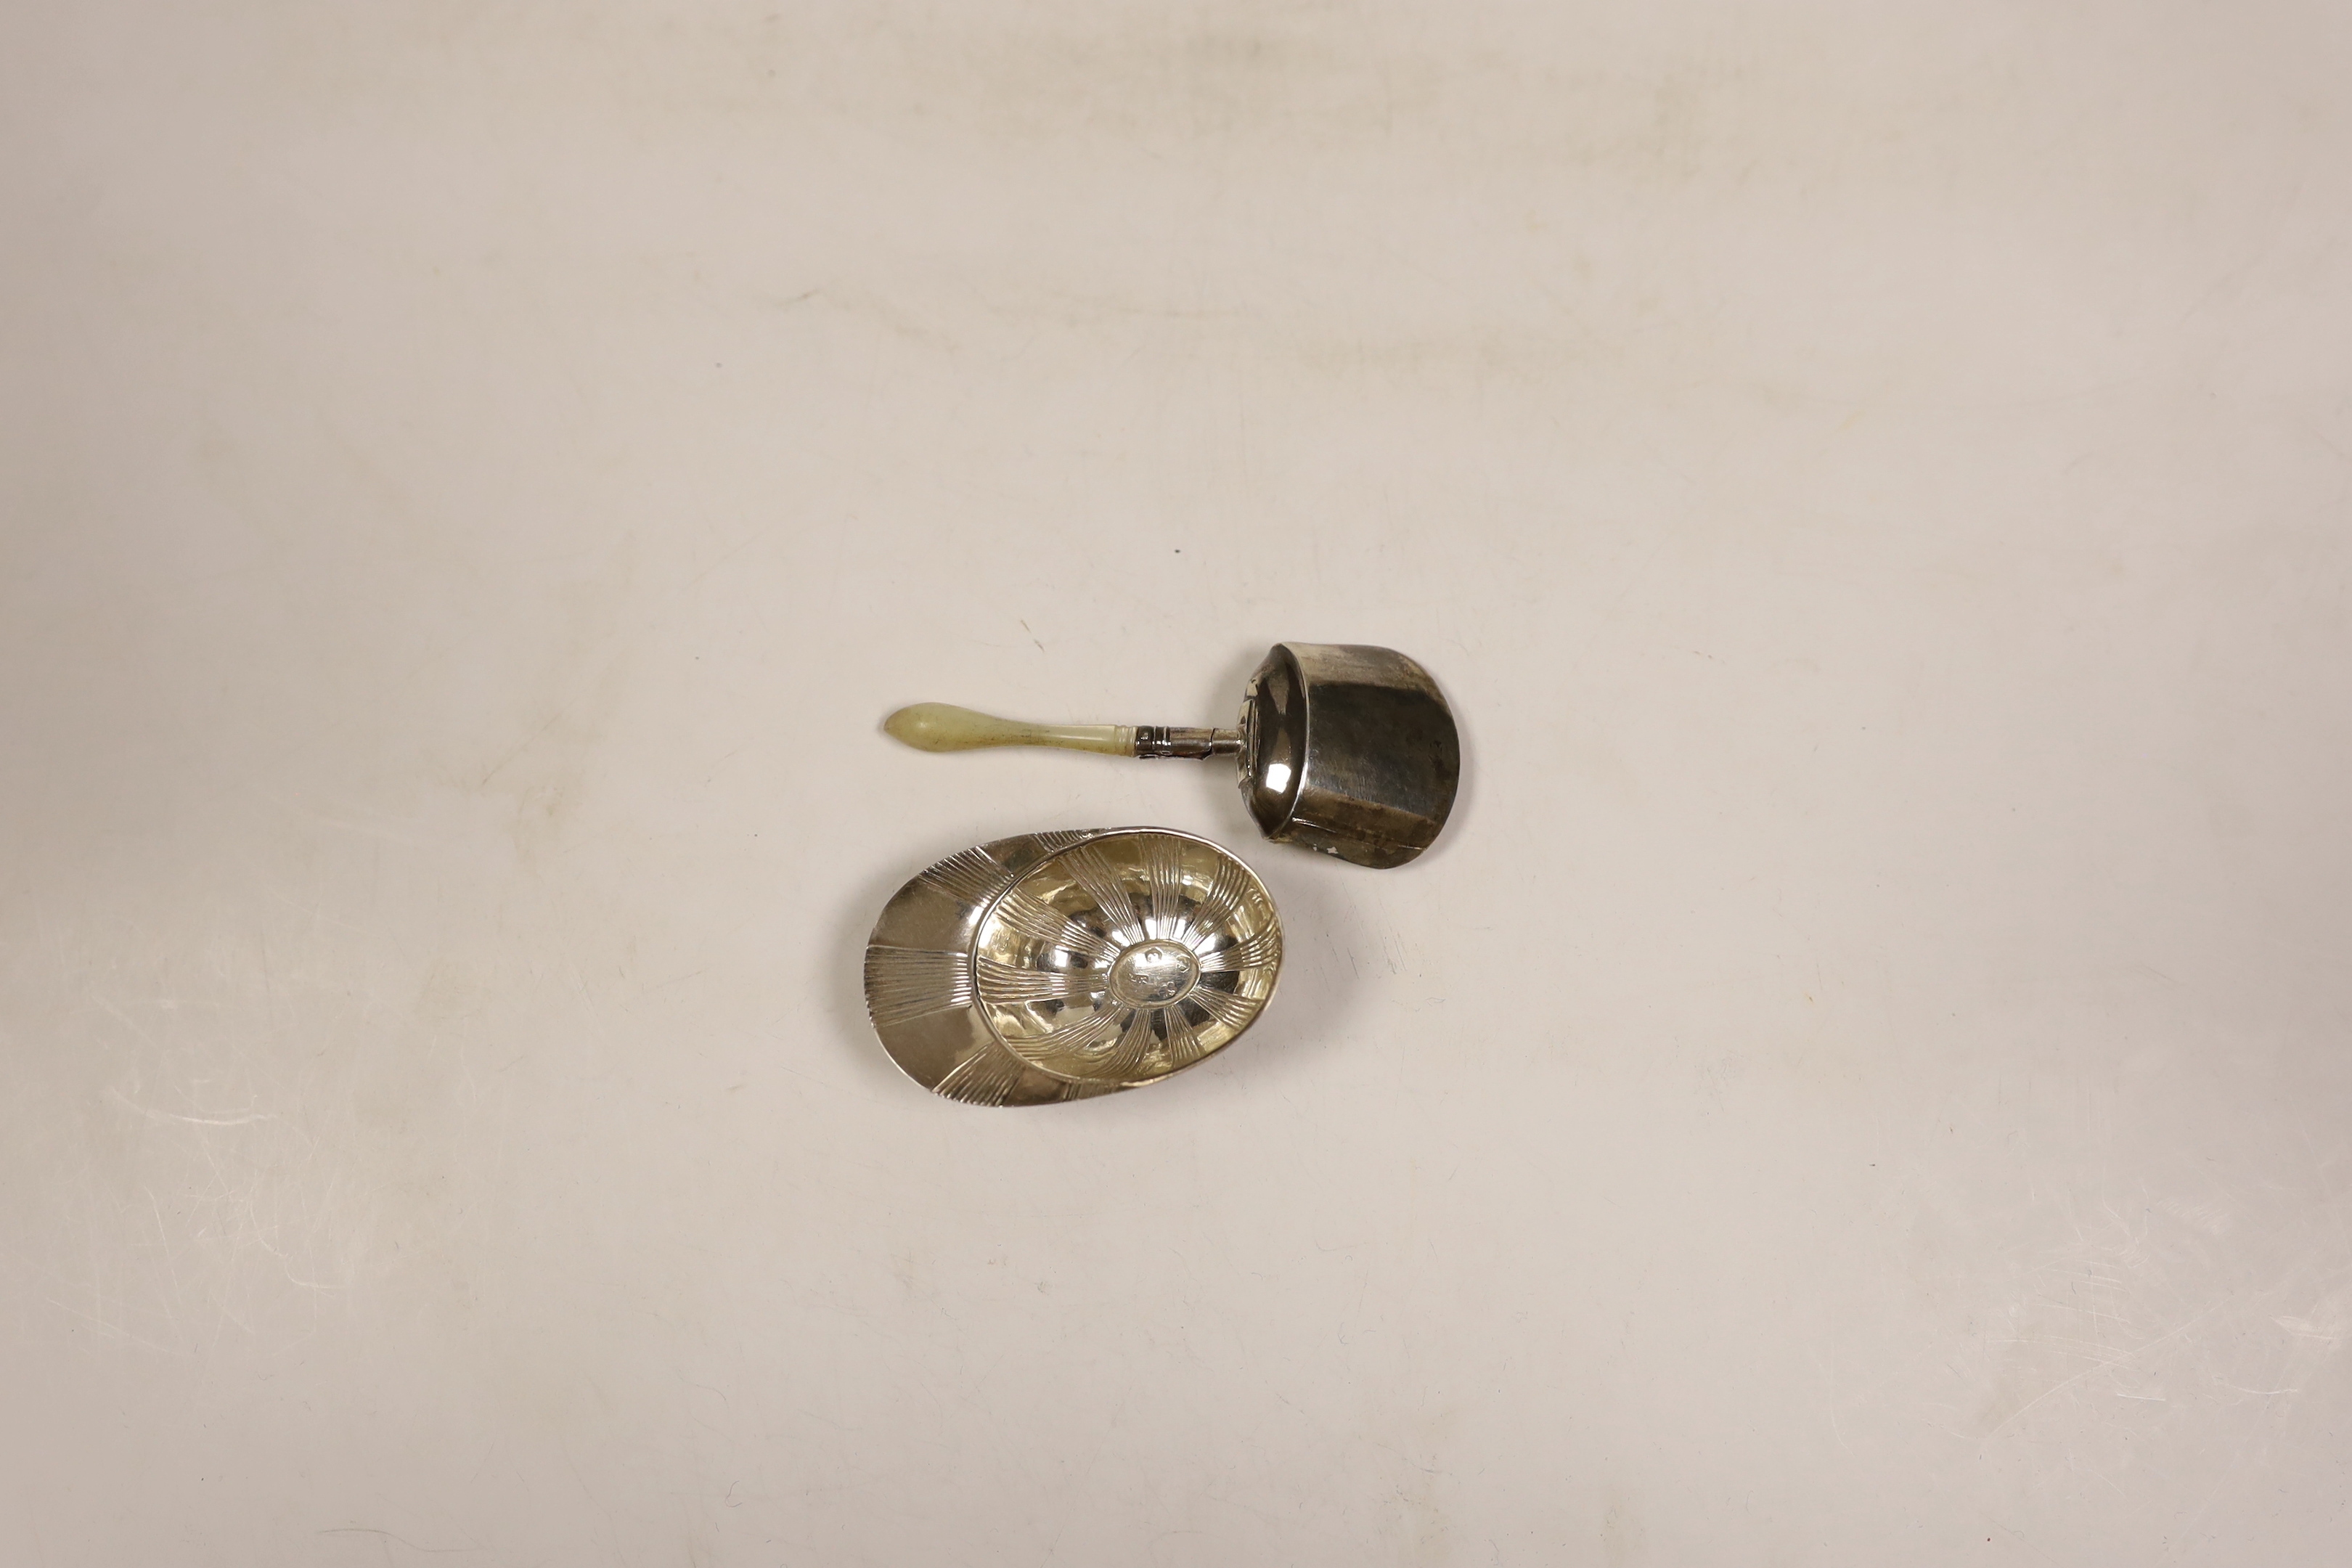 A George III silver jockey cap caddy spoon, Birmingham, 1798?, 54mm and another George III silver gilt shovel caddy spoon, with mother of pearl handle, Birmingham, 1806.